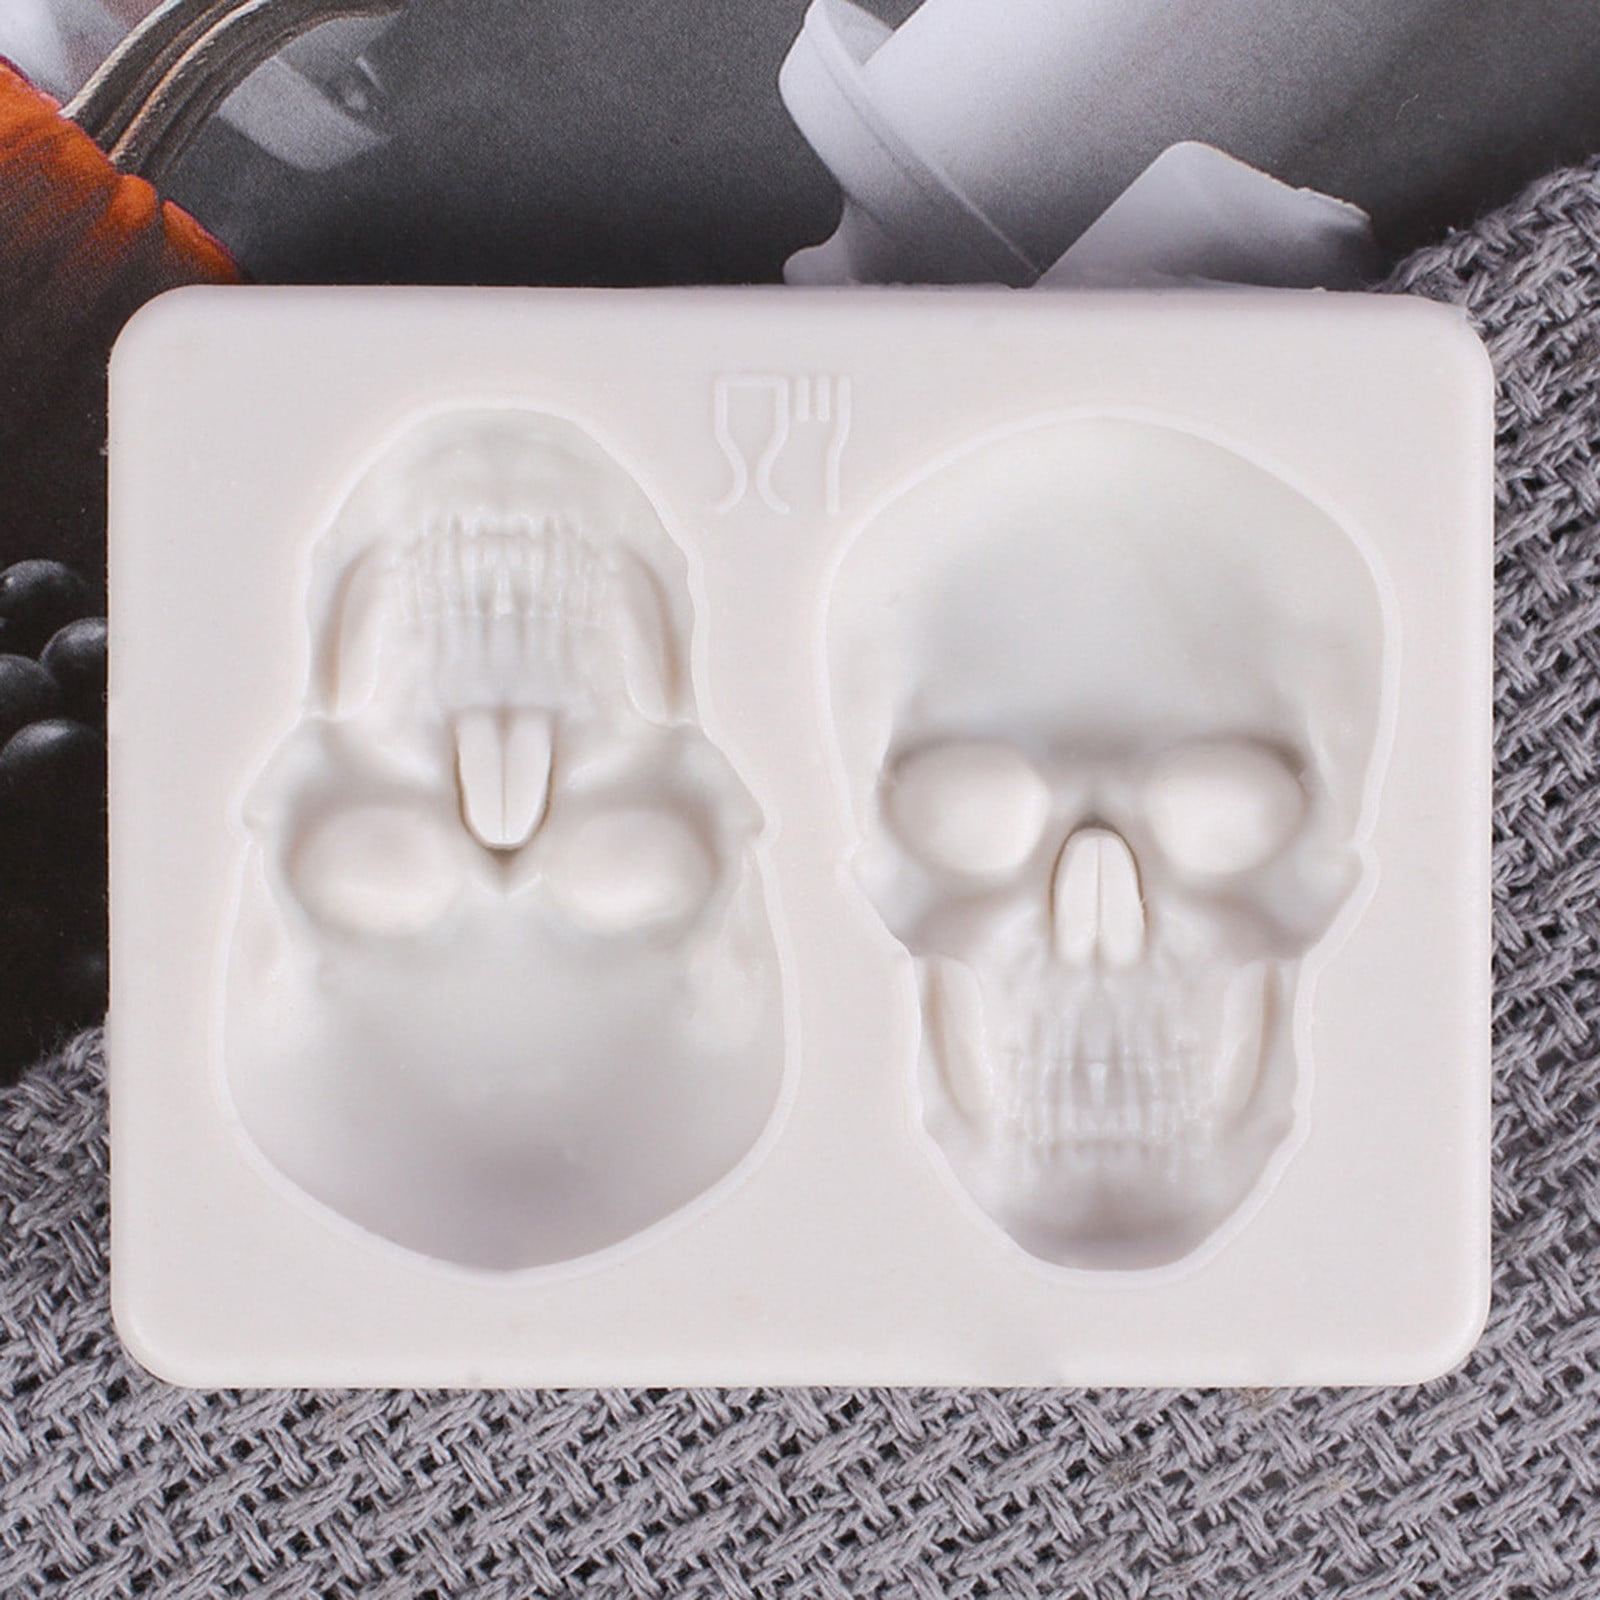 1:1 The Actual Size Skull 3D Silicone Fondant Cake Molds Halloween Series  Skull DIY Decor Embosser Mould Cake Baking Tools FM463 - AliExpress